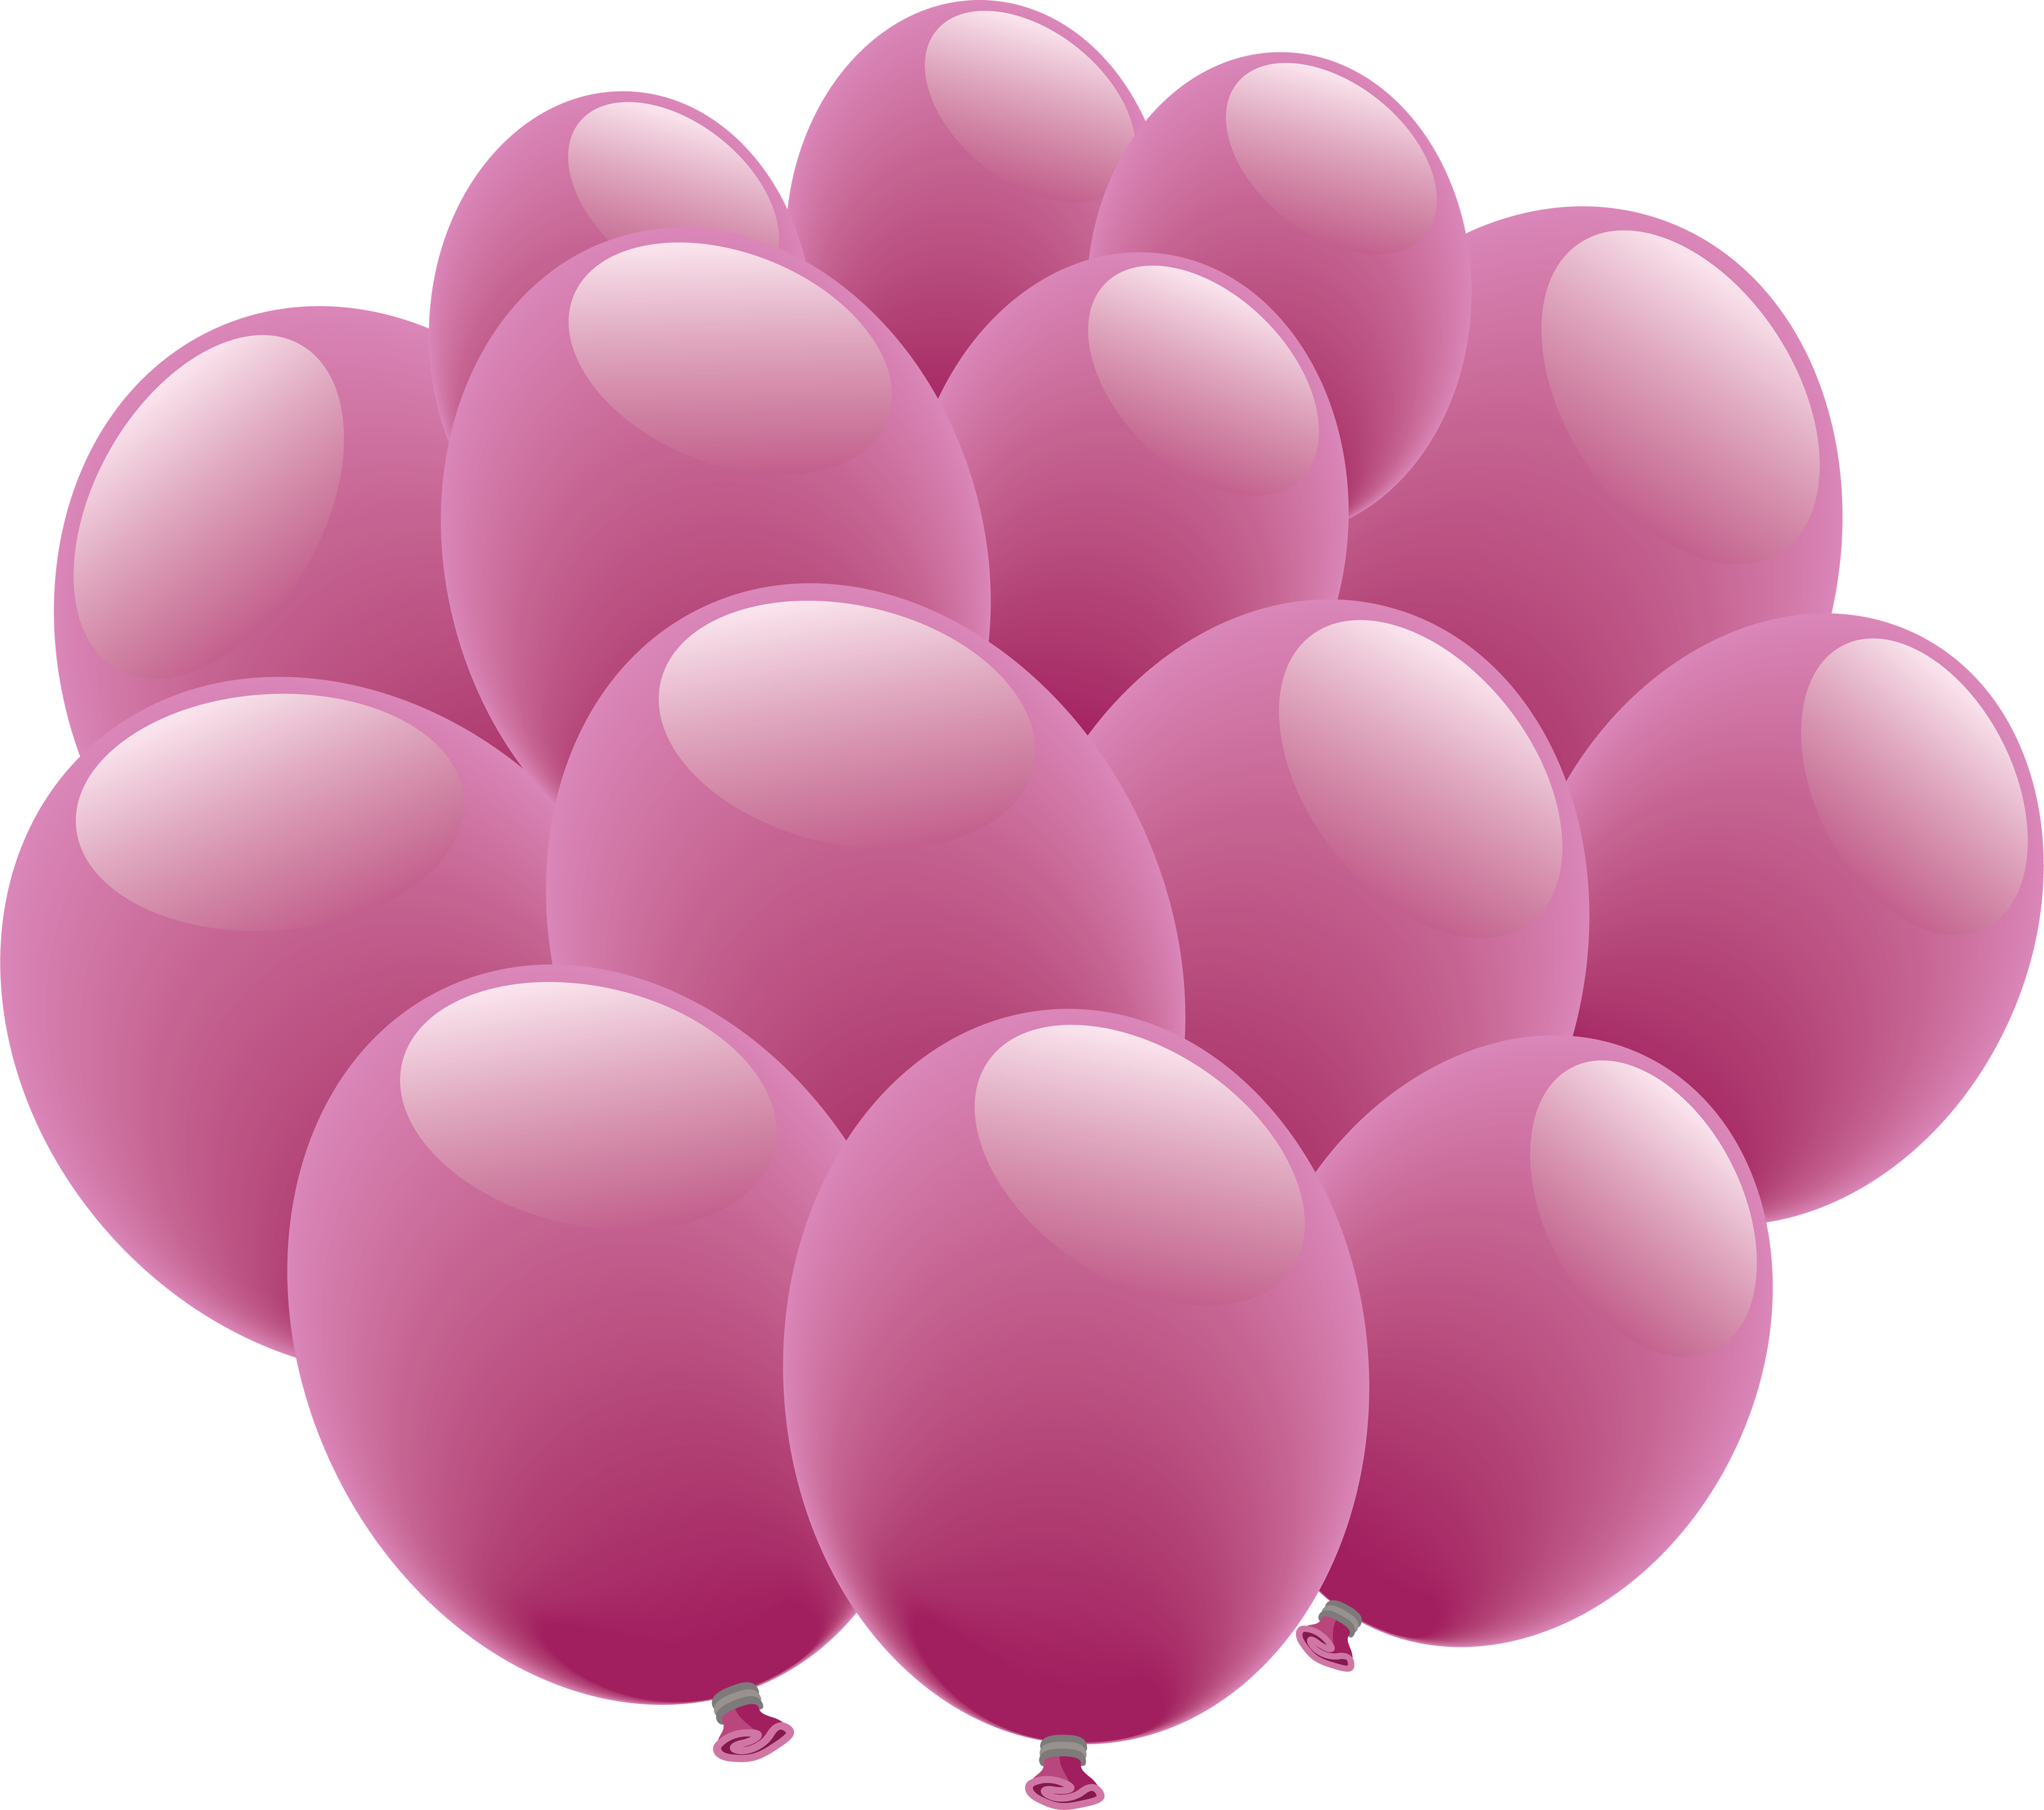 Balloons thirty four isolated. Gas clipart big balloon